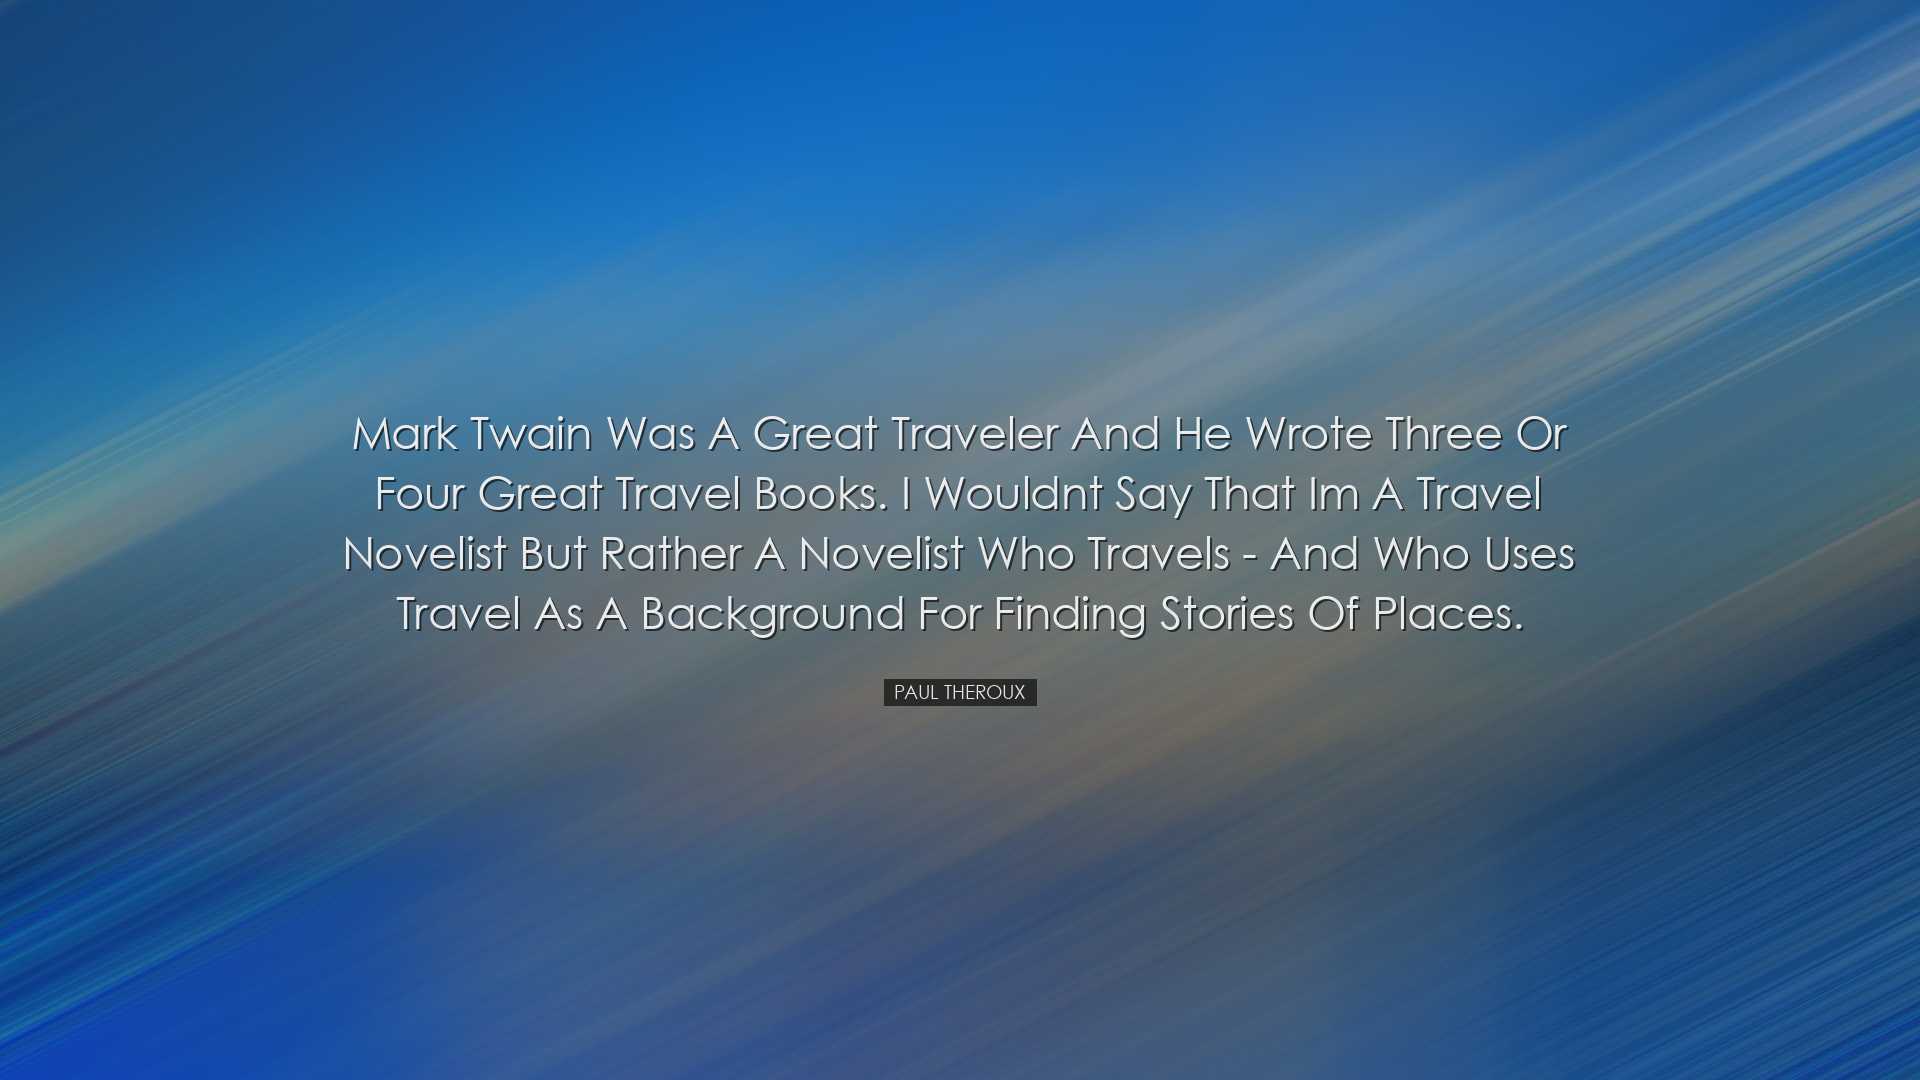 Mark Twain was a great traveler and he wrote three or four great t